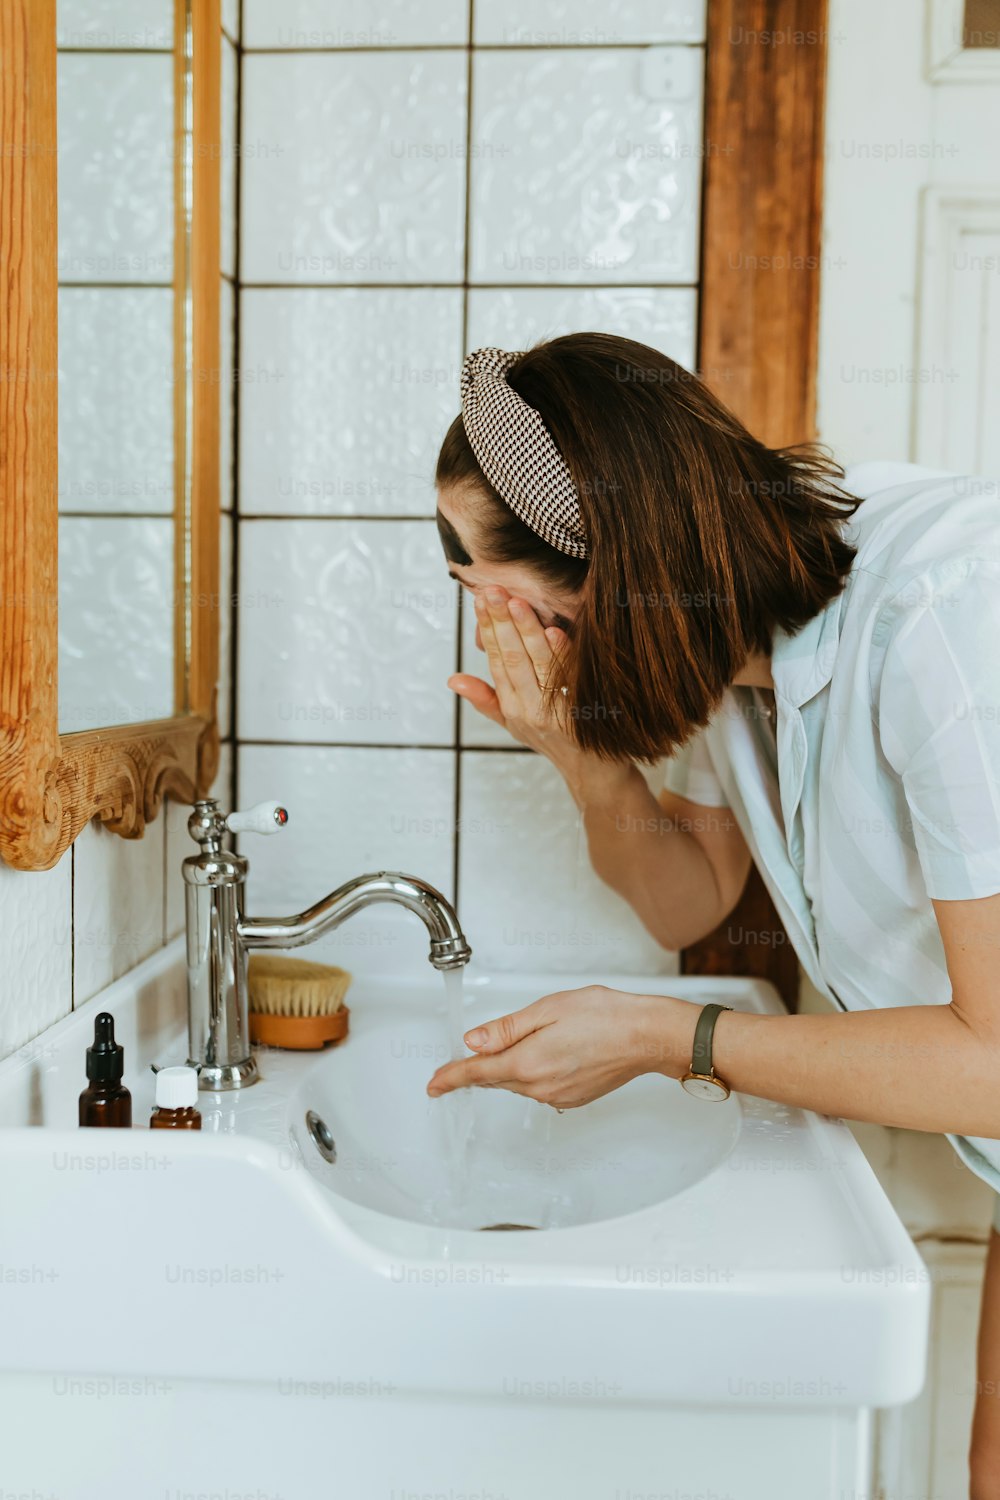 a woman is cleaning her face in the bathroom